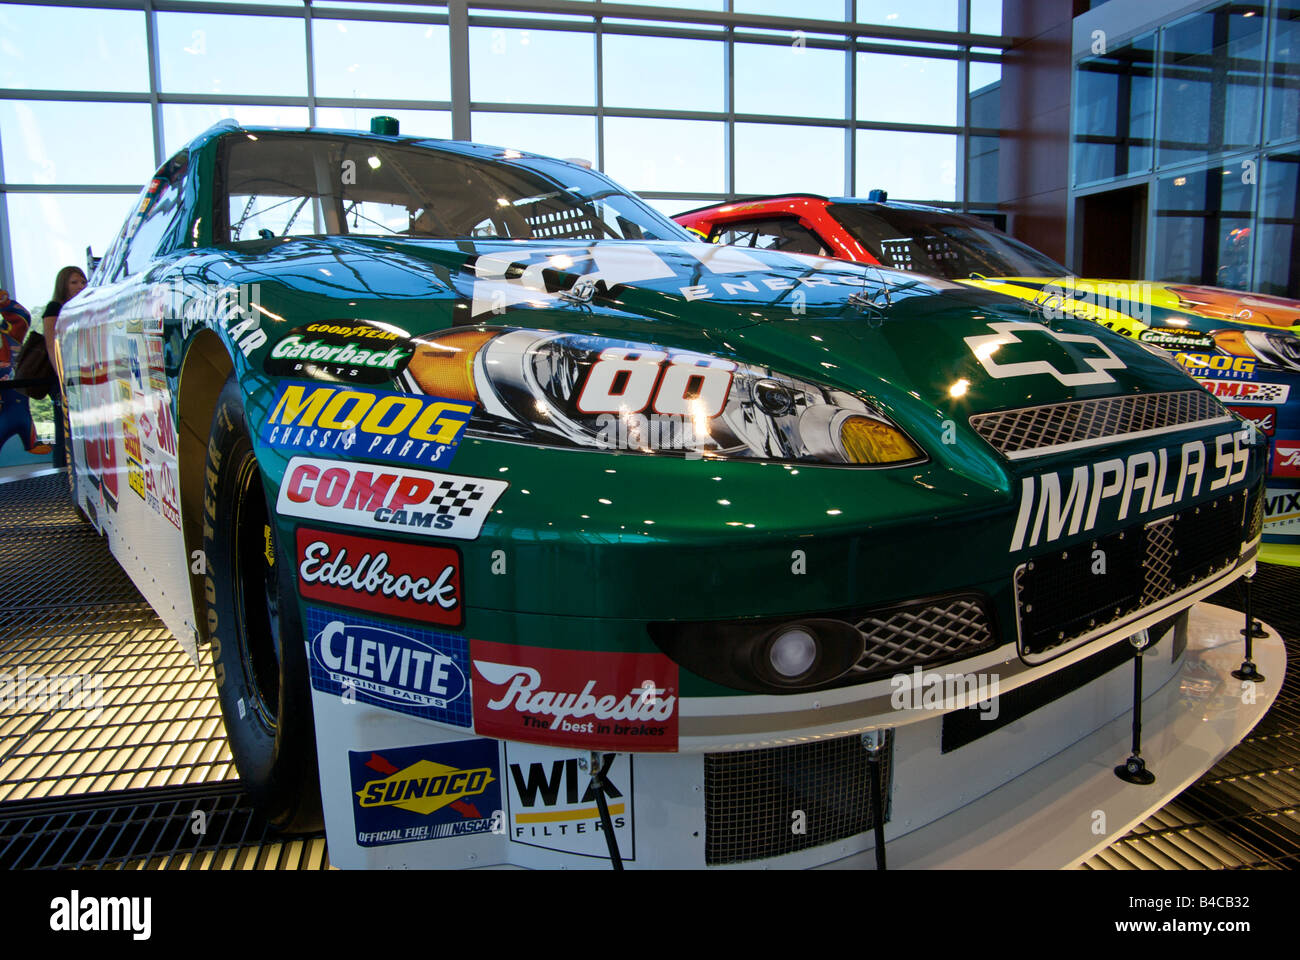 Dale Earnhardt Junior's number 88 Chevrolet Impala SS NASCAR race car on display at Hendrick Motorsports Museum Stock Photo